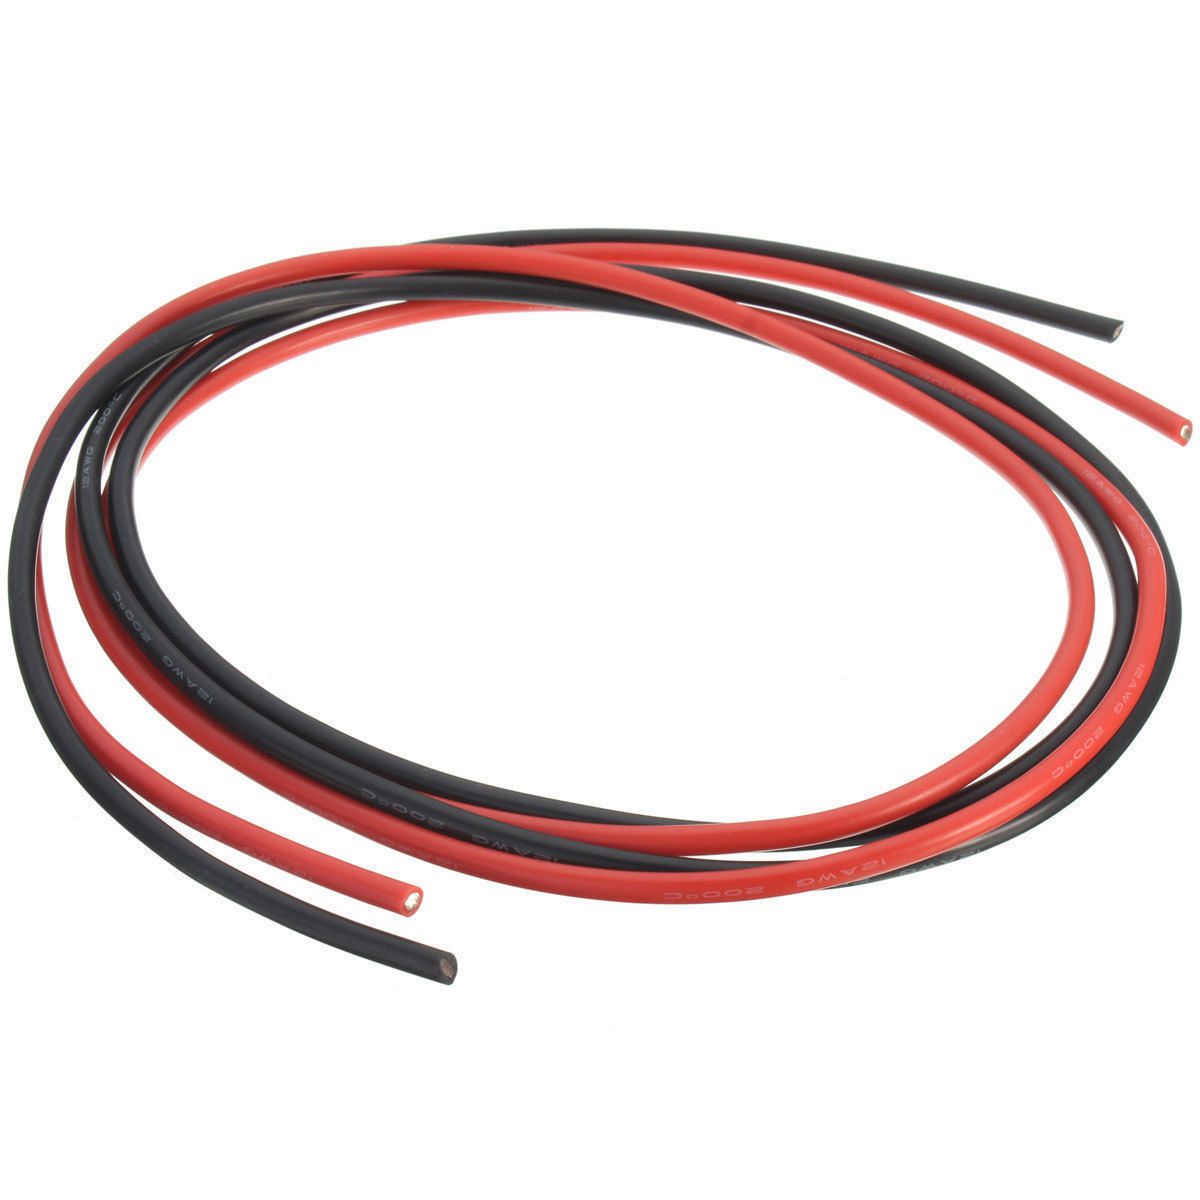 200degree High Temperature Fire Proof Flexible Silicone Wire Cable